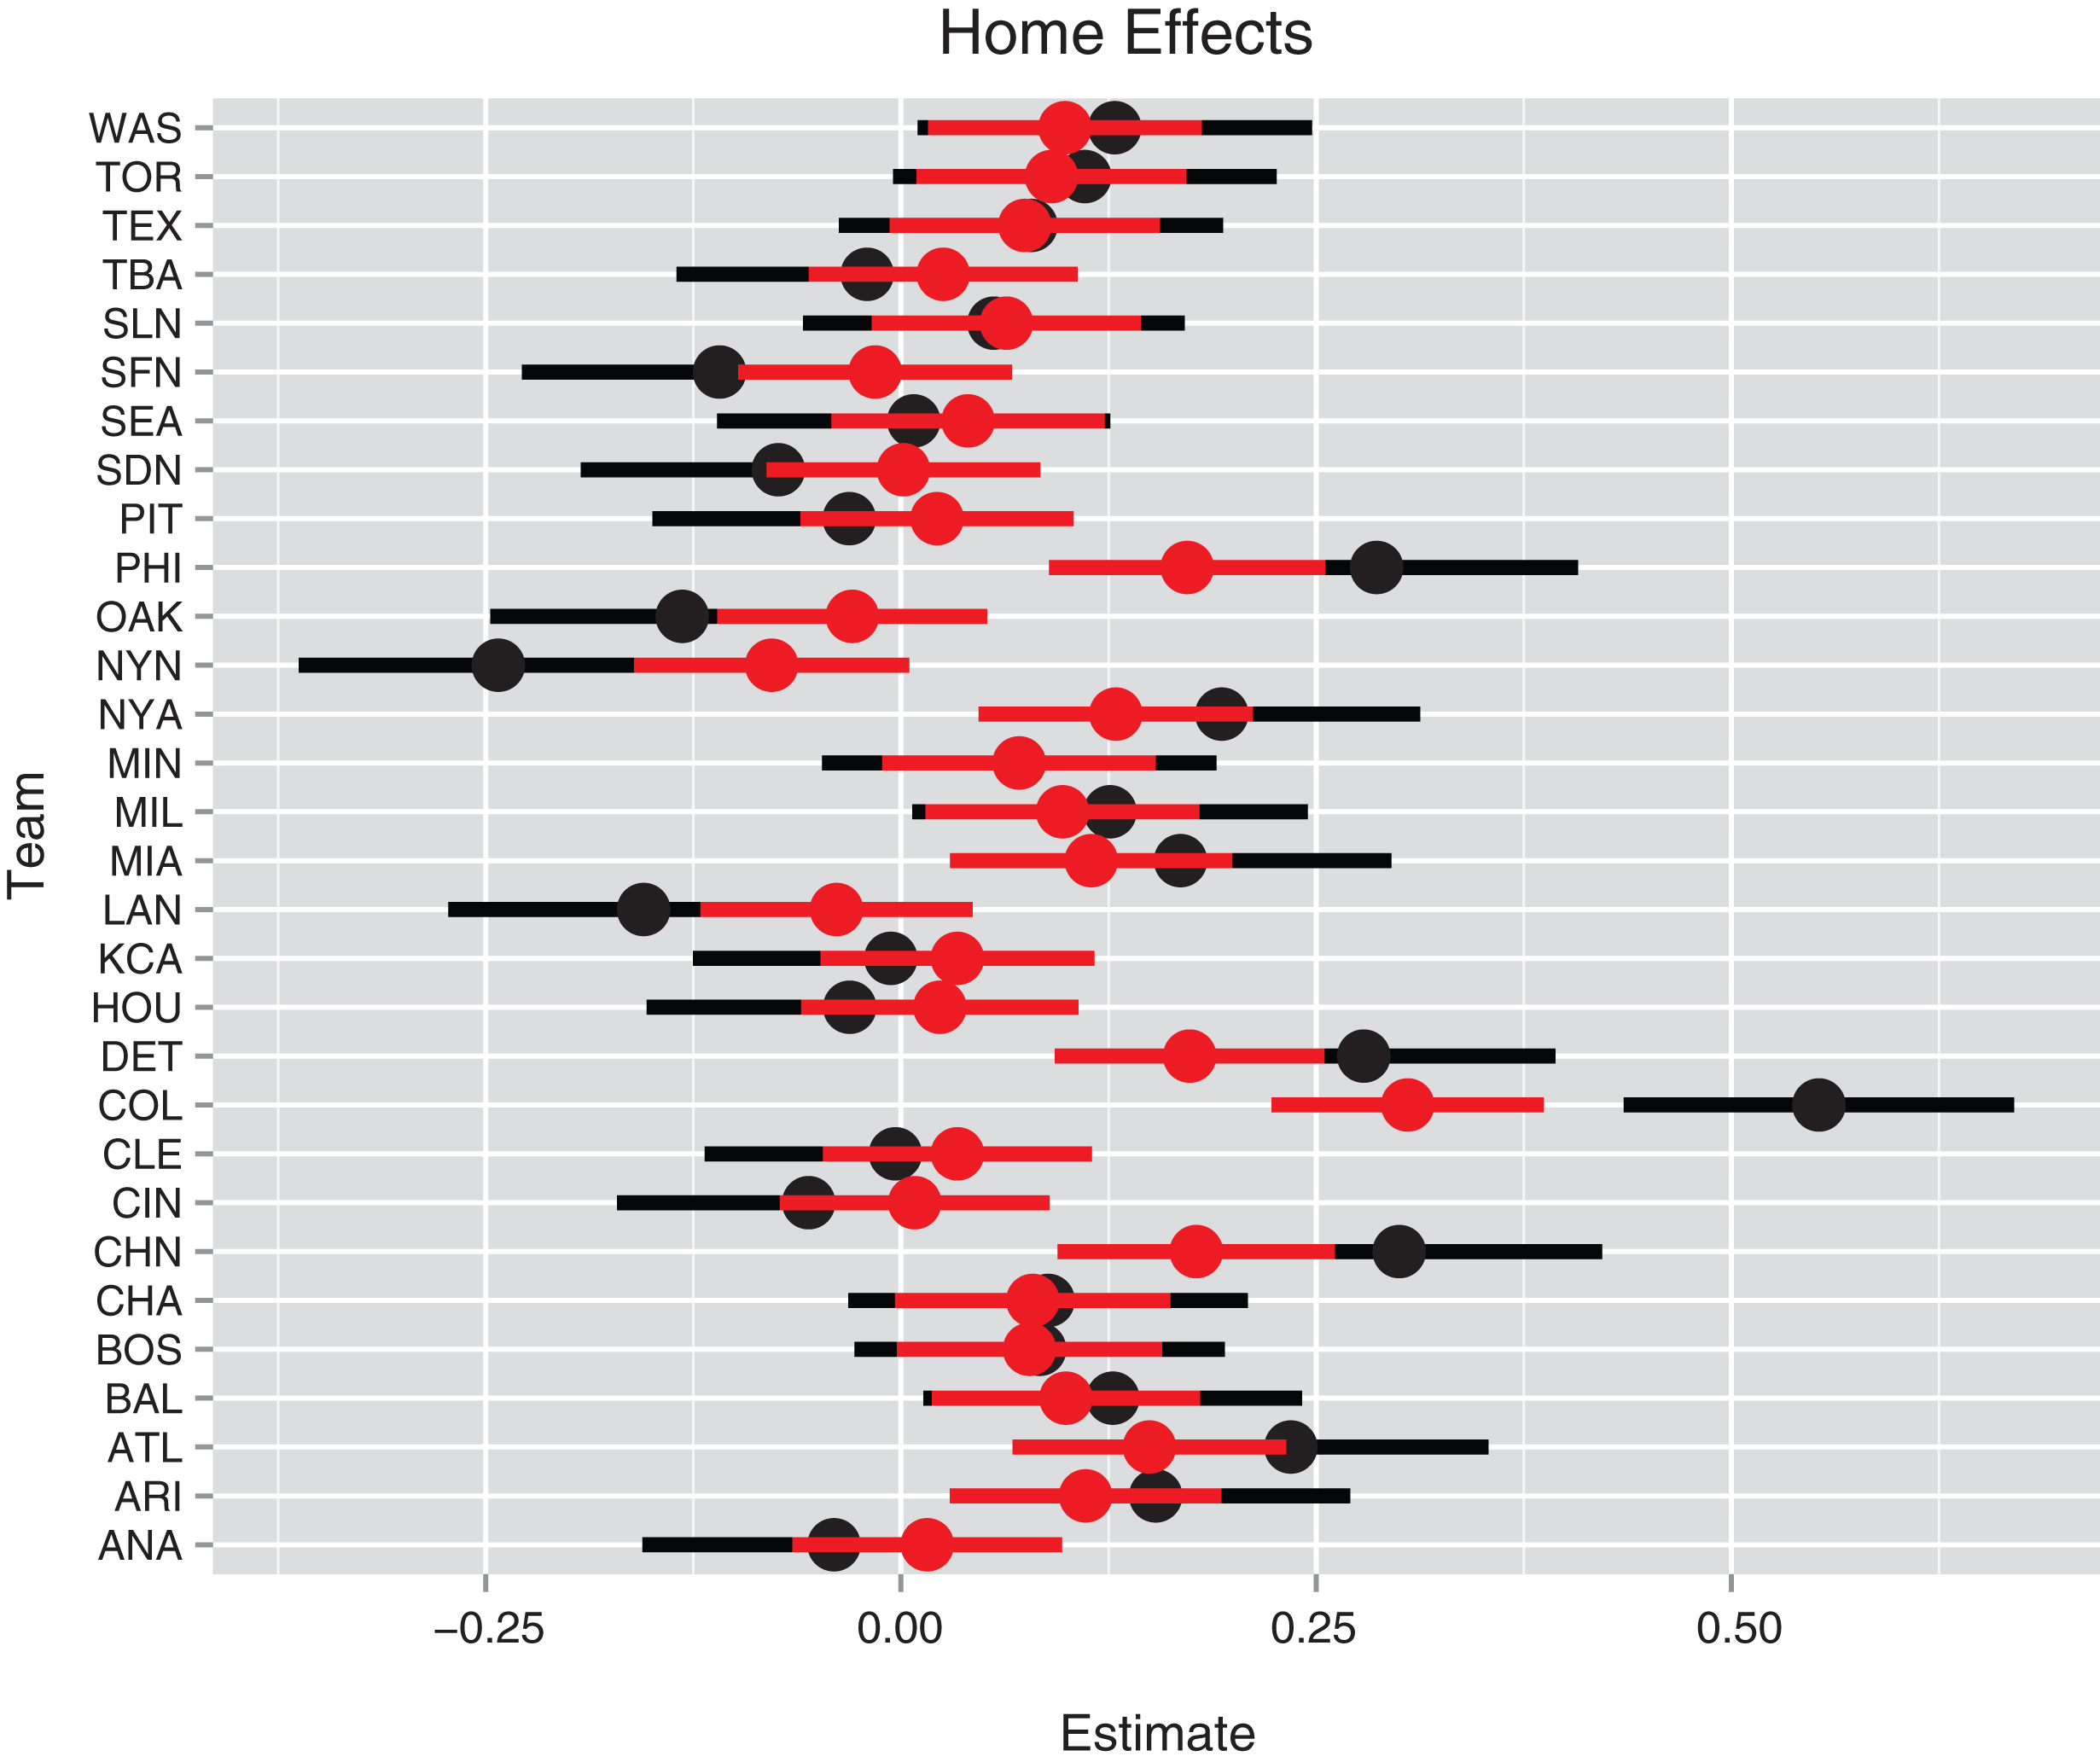 Individual and multilevel home field run effects for all teams. The black line represents the individual estimate plus and minus the standard error and the red line represents the multilevel estimate plus and minus the standard error.